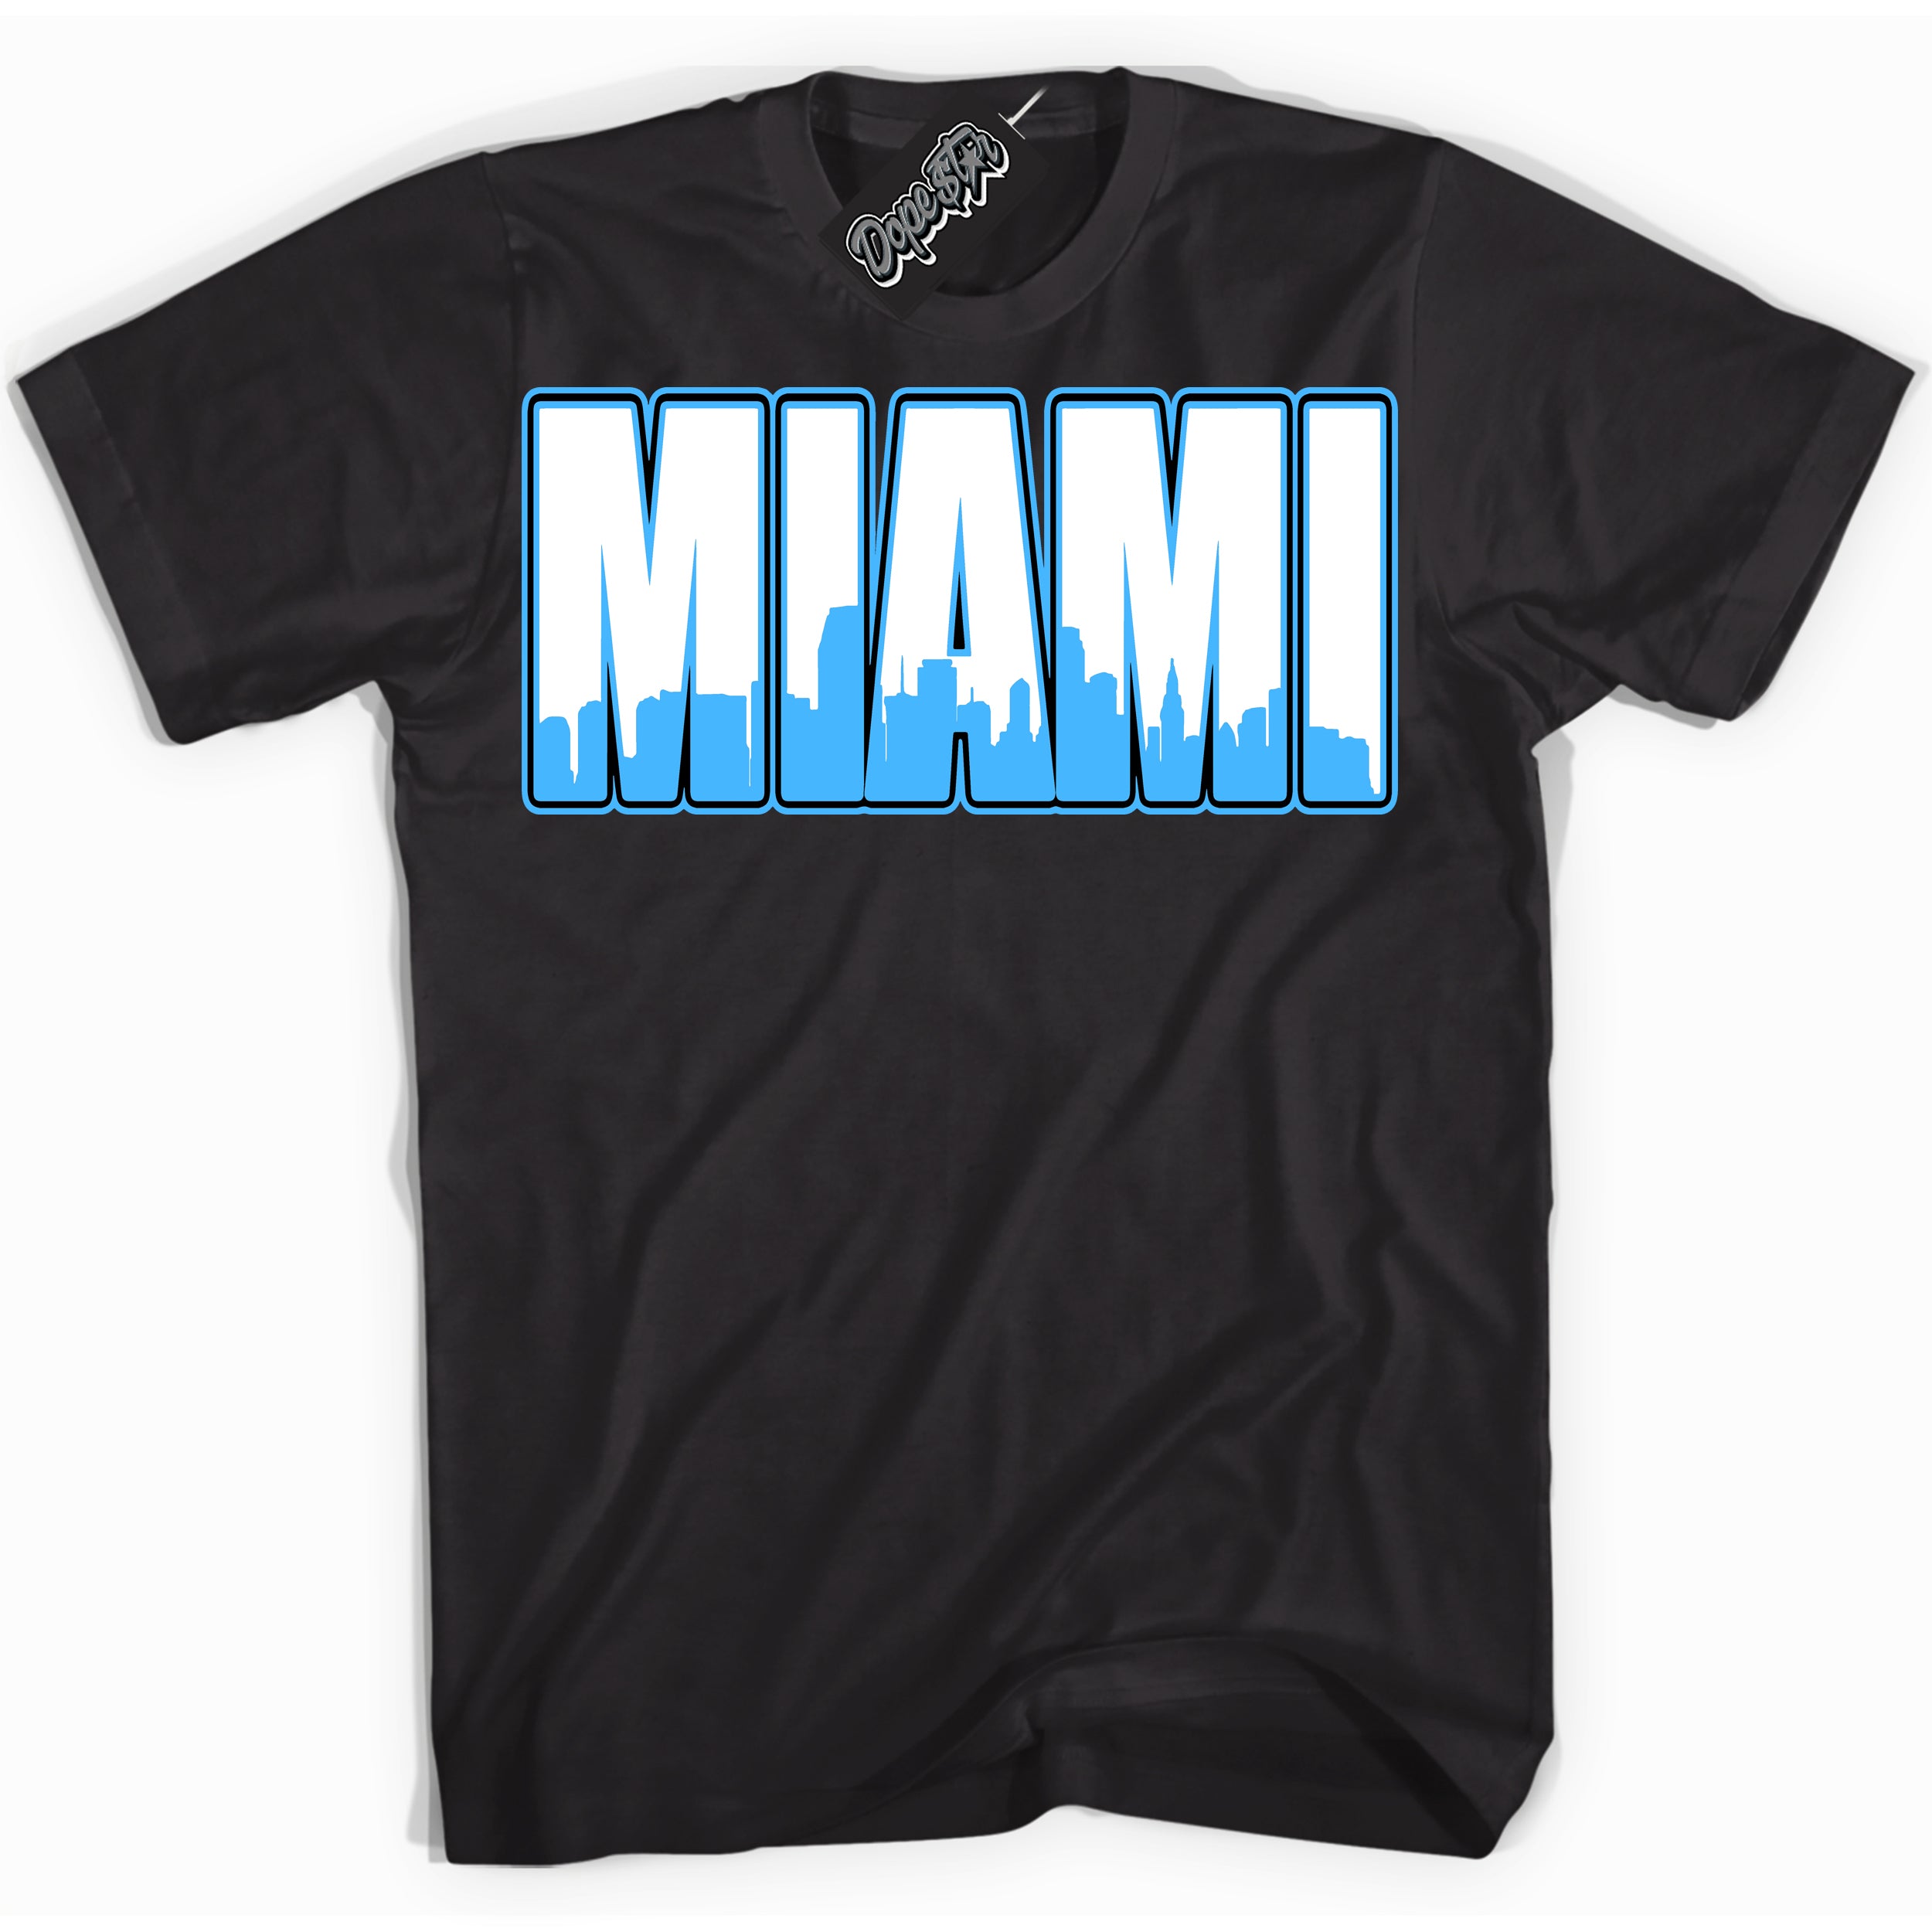 Cool Black graphic tee with “ Miami ” design, that perfectly matches Powder Blue 9s sneakers 